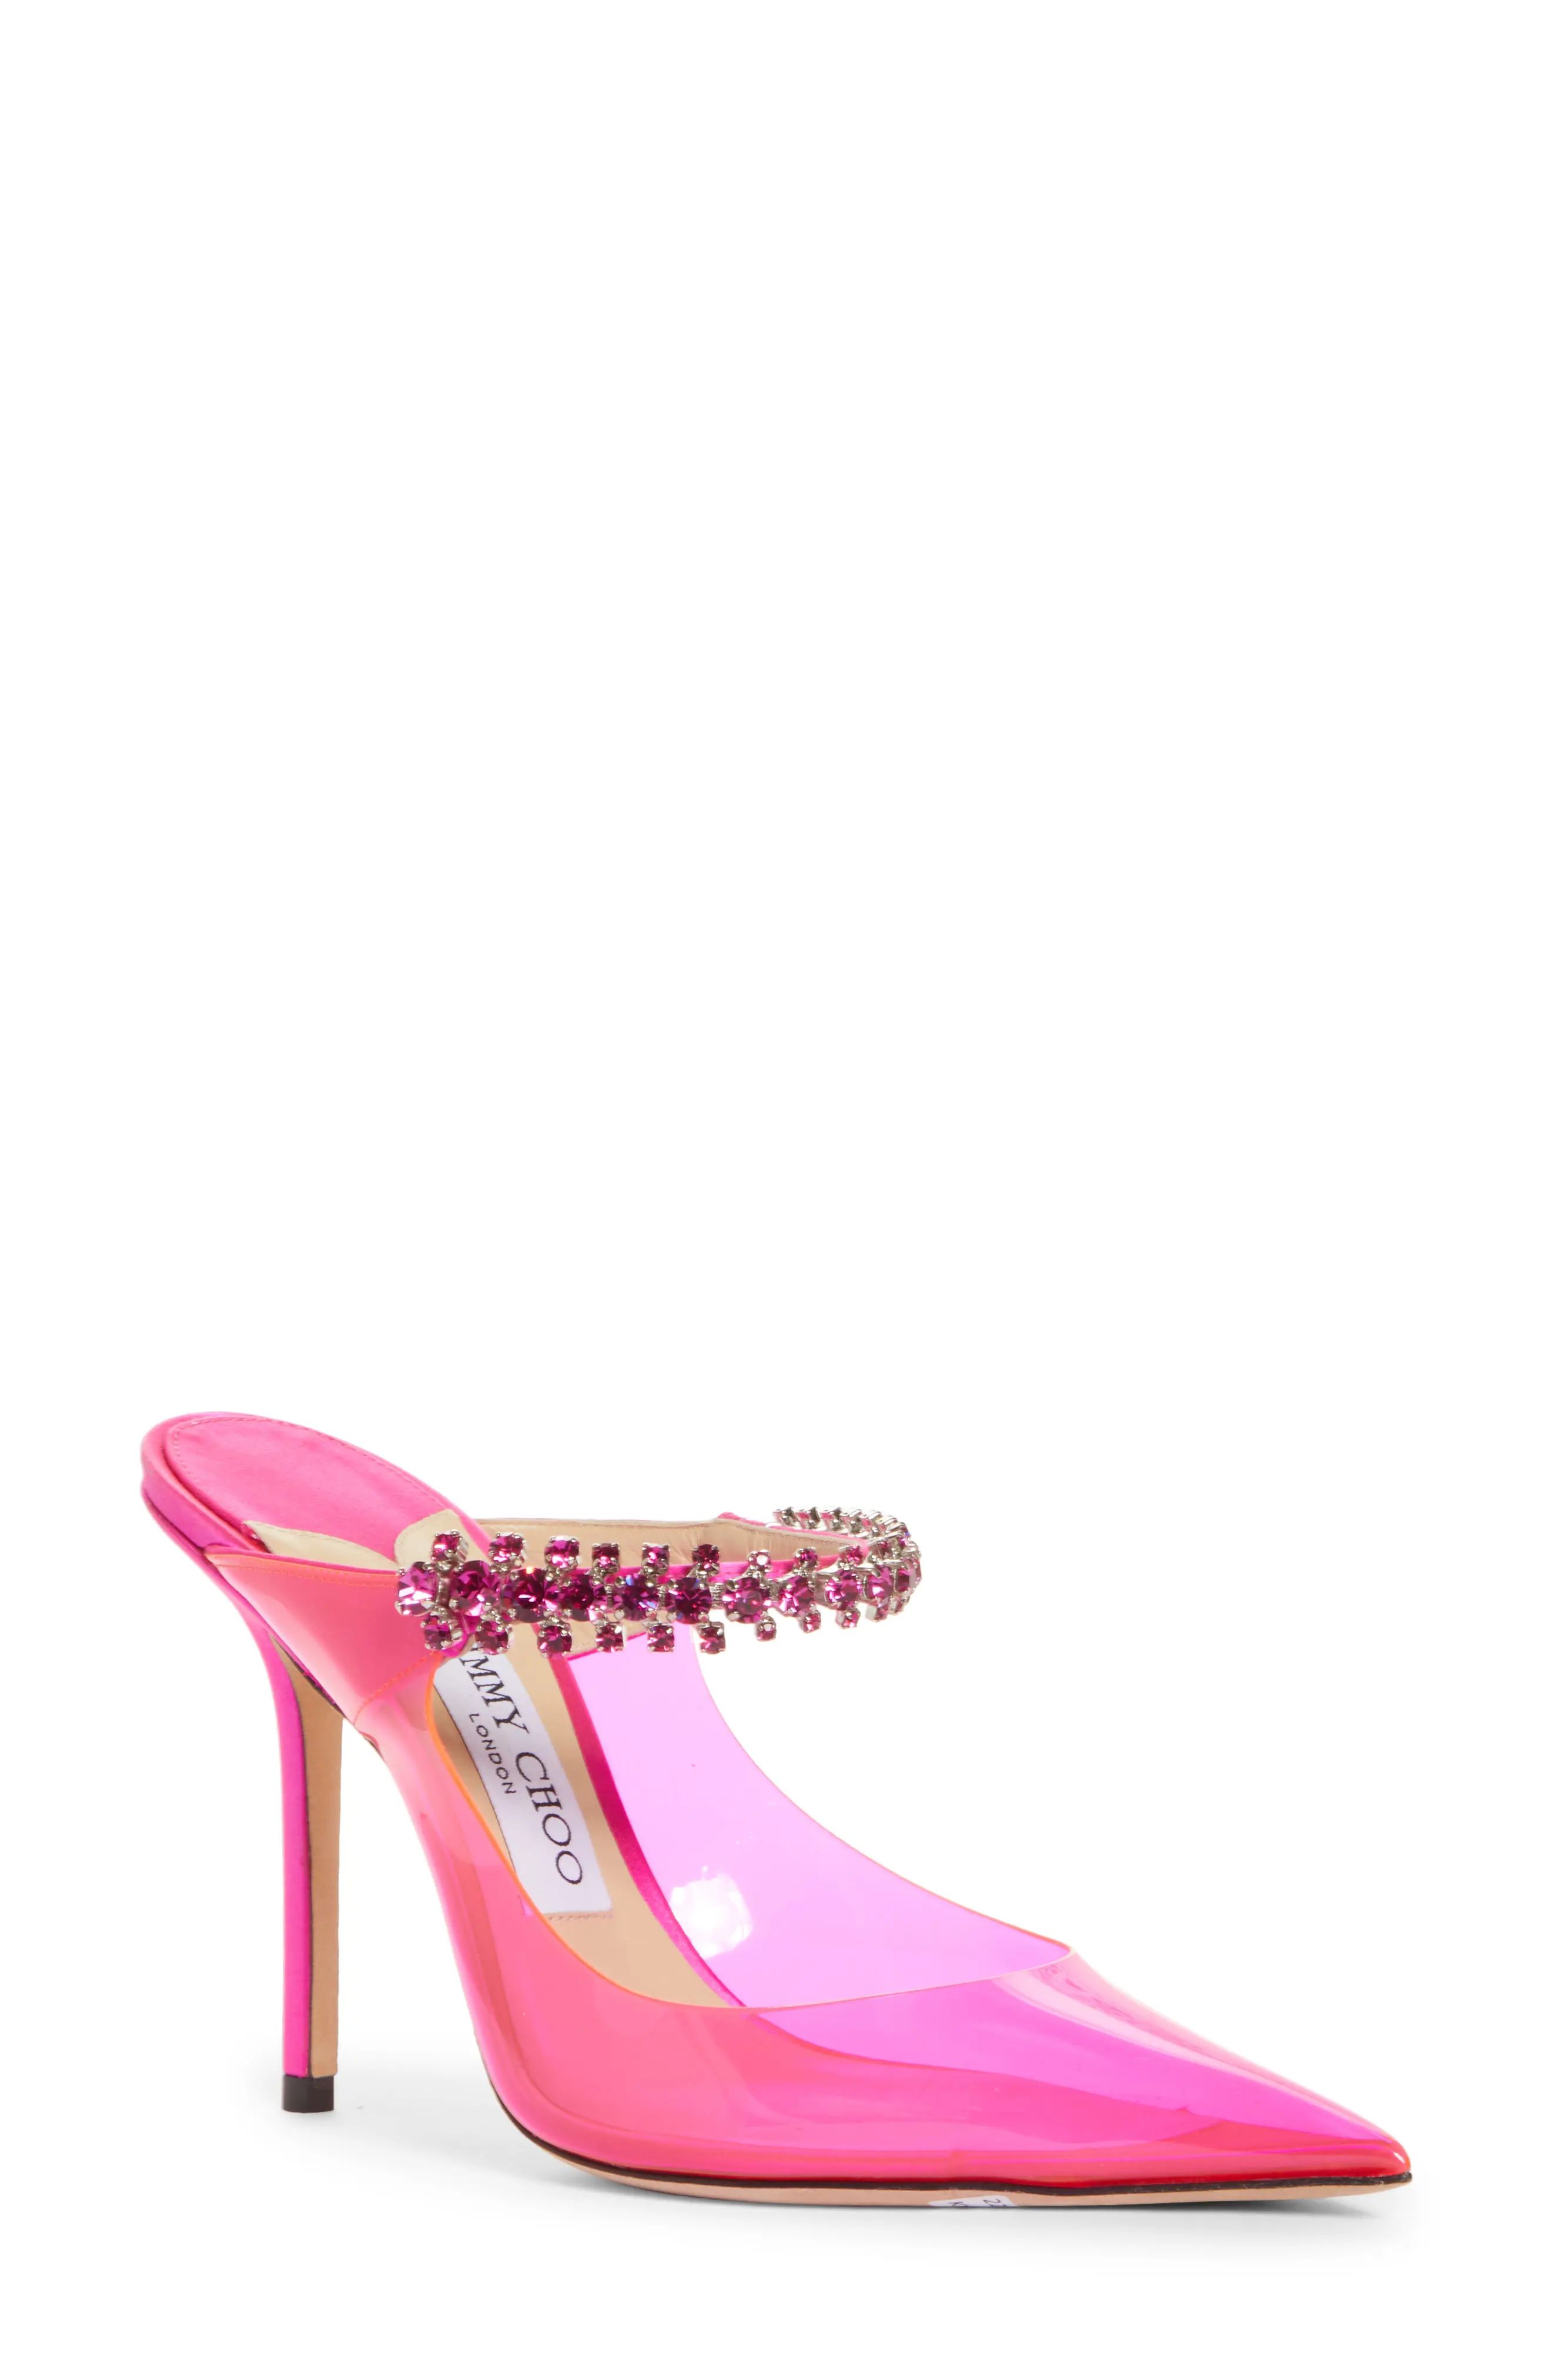 Jimmy Choo Bing Crystal Embellished Clear Mule in Hot Pink/Pink at Nordstrom, Size 5.5Us | Nordstrom